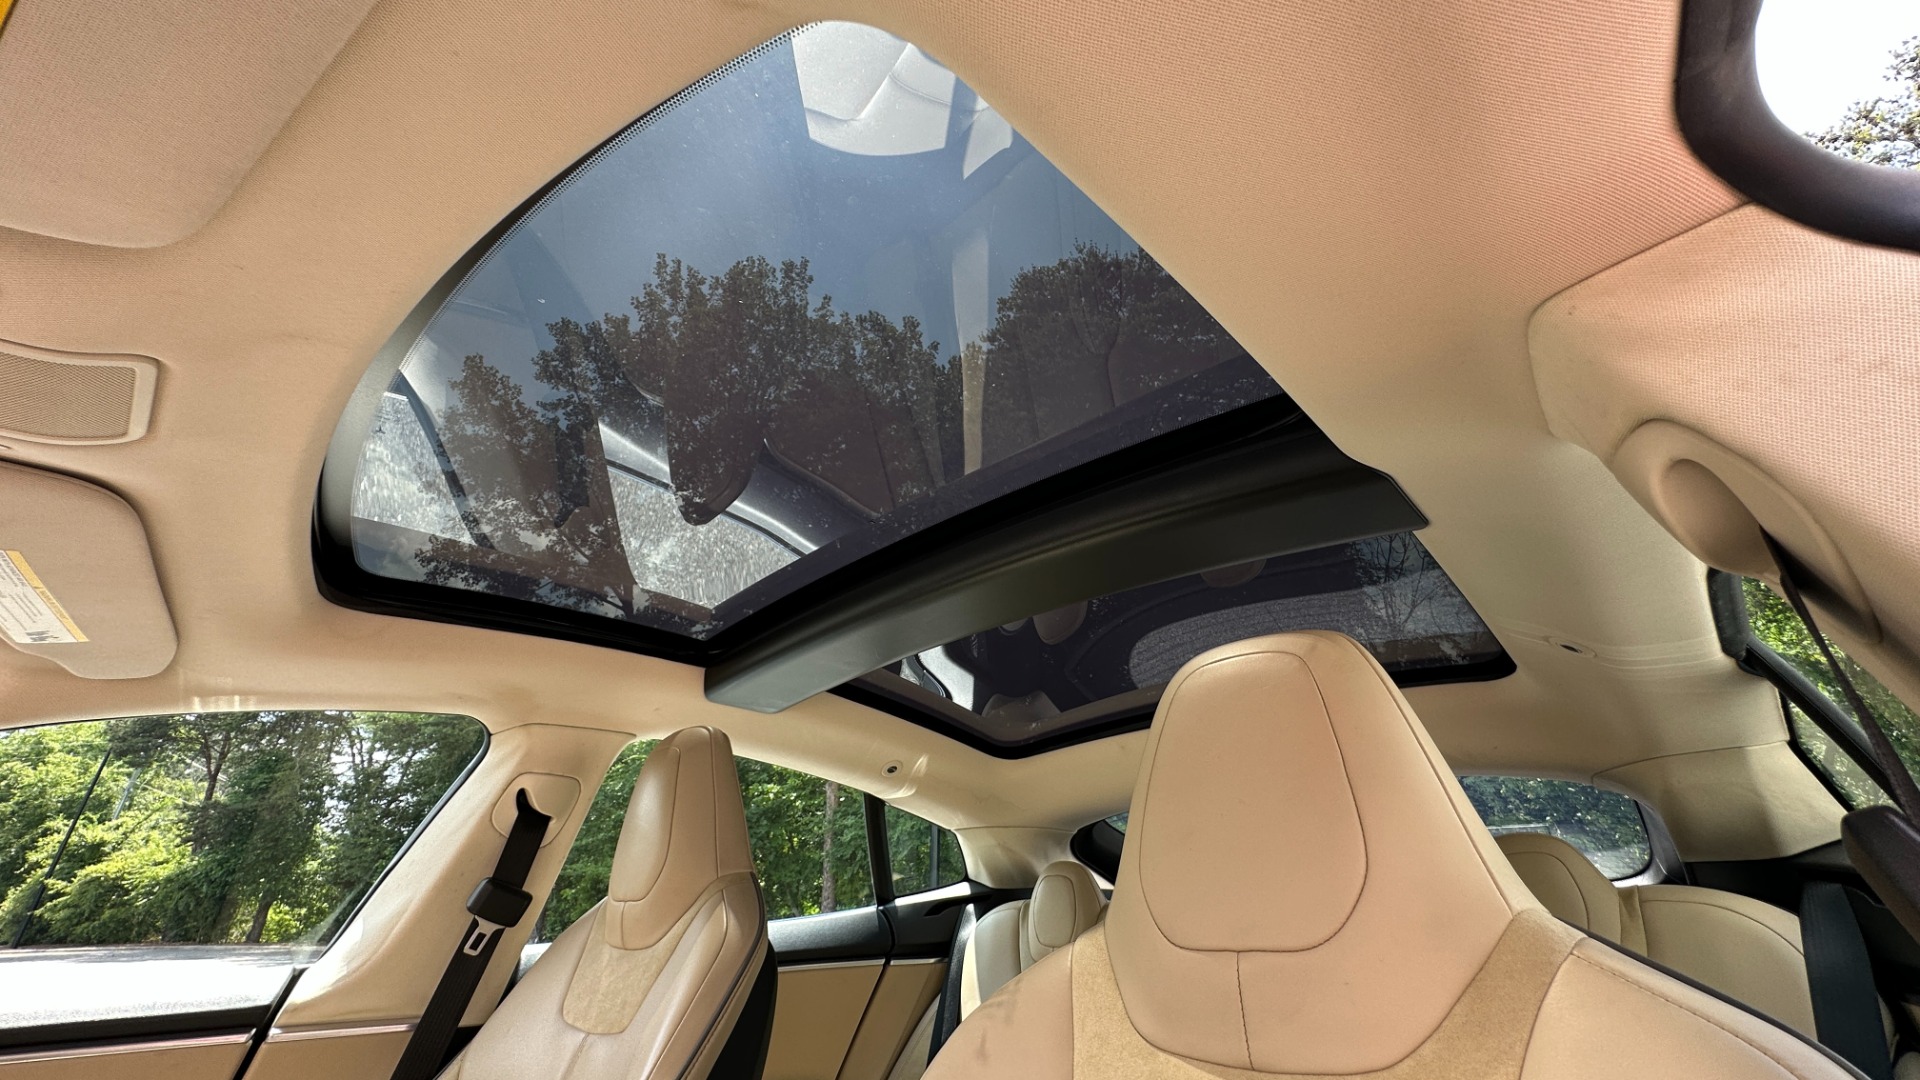 Used 2014 Tesla Model S 60 kWh Battery / 60D / PREMIUM CONNECTIVITY / LEATHER / SUNROOF for sale $22,995 at Formula Imports in Charlotte NC 28227 21